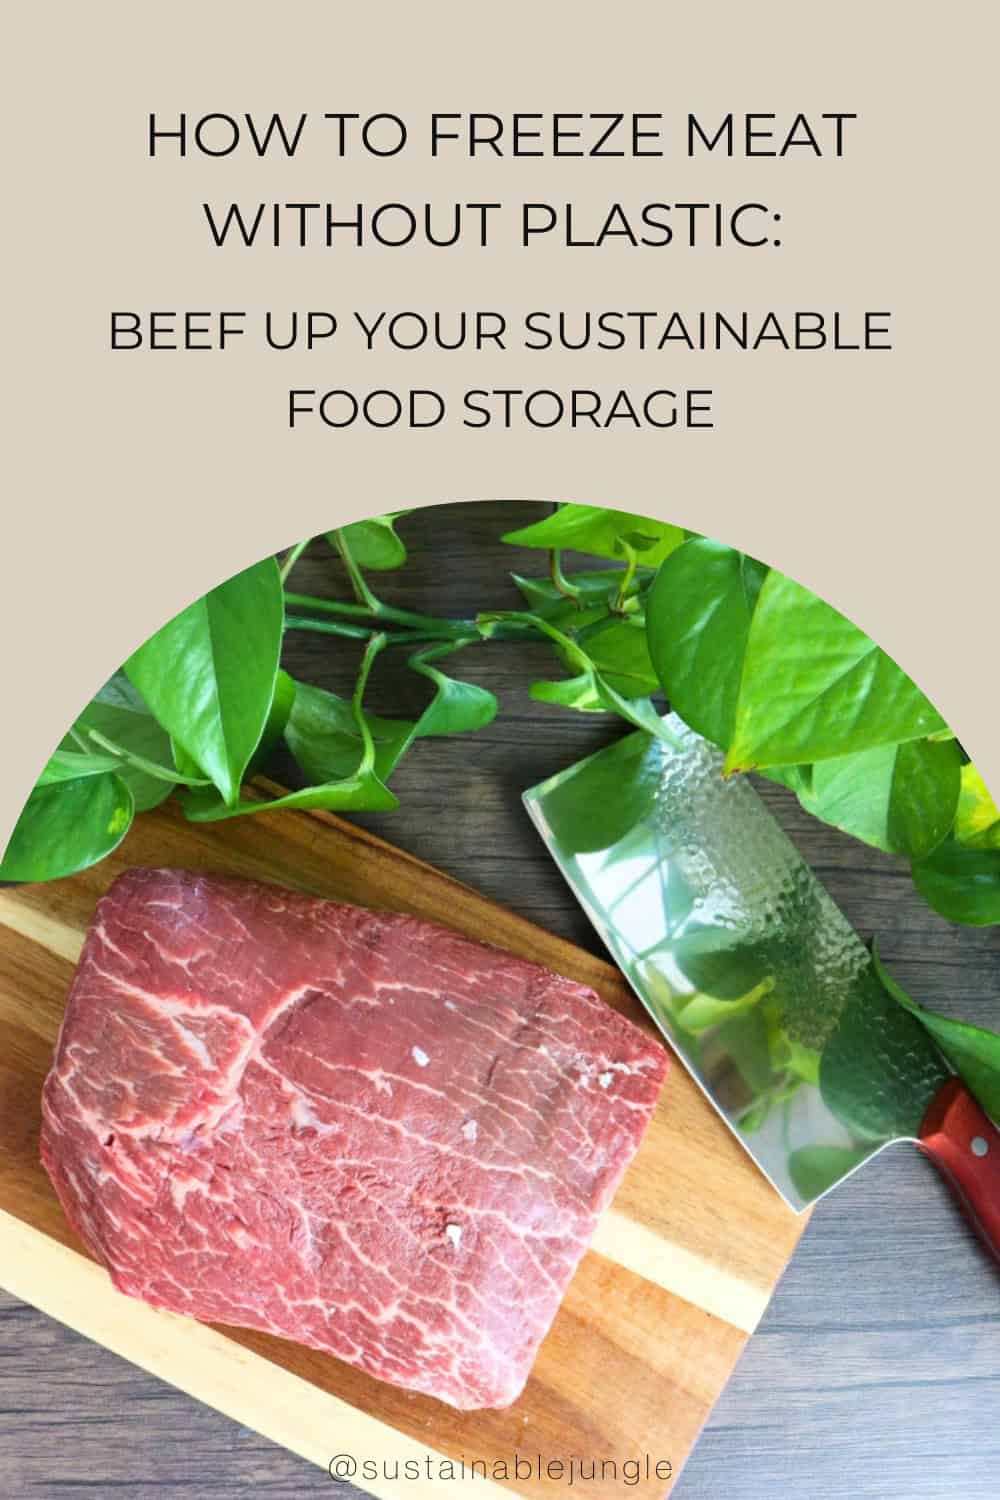 How to Freeze Meat Without Plastic: Beef Up Your Sustainable Food StorageImage by Sustainable Jungle#hottofreezemeatwithoutplastic #bestwaytofreezemeat #howtostoremeatinfreezerwithoutplastic #freezingmeat #plasticfreefreezerstorage #sustainablejungle